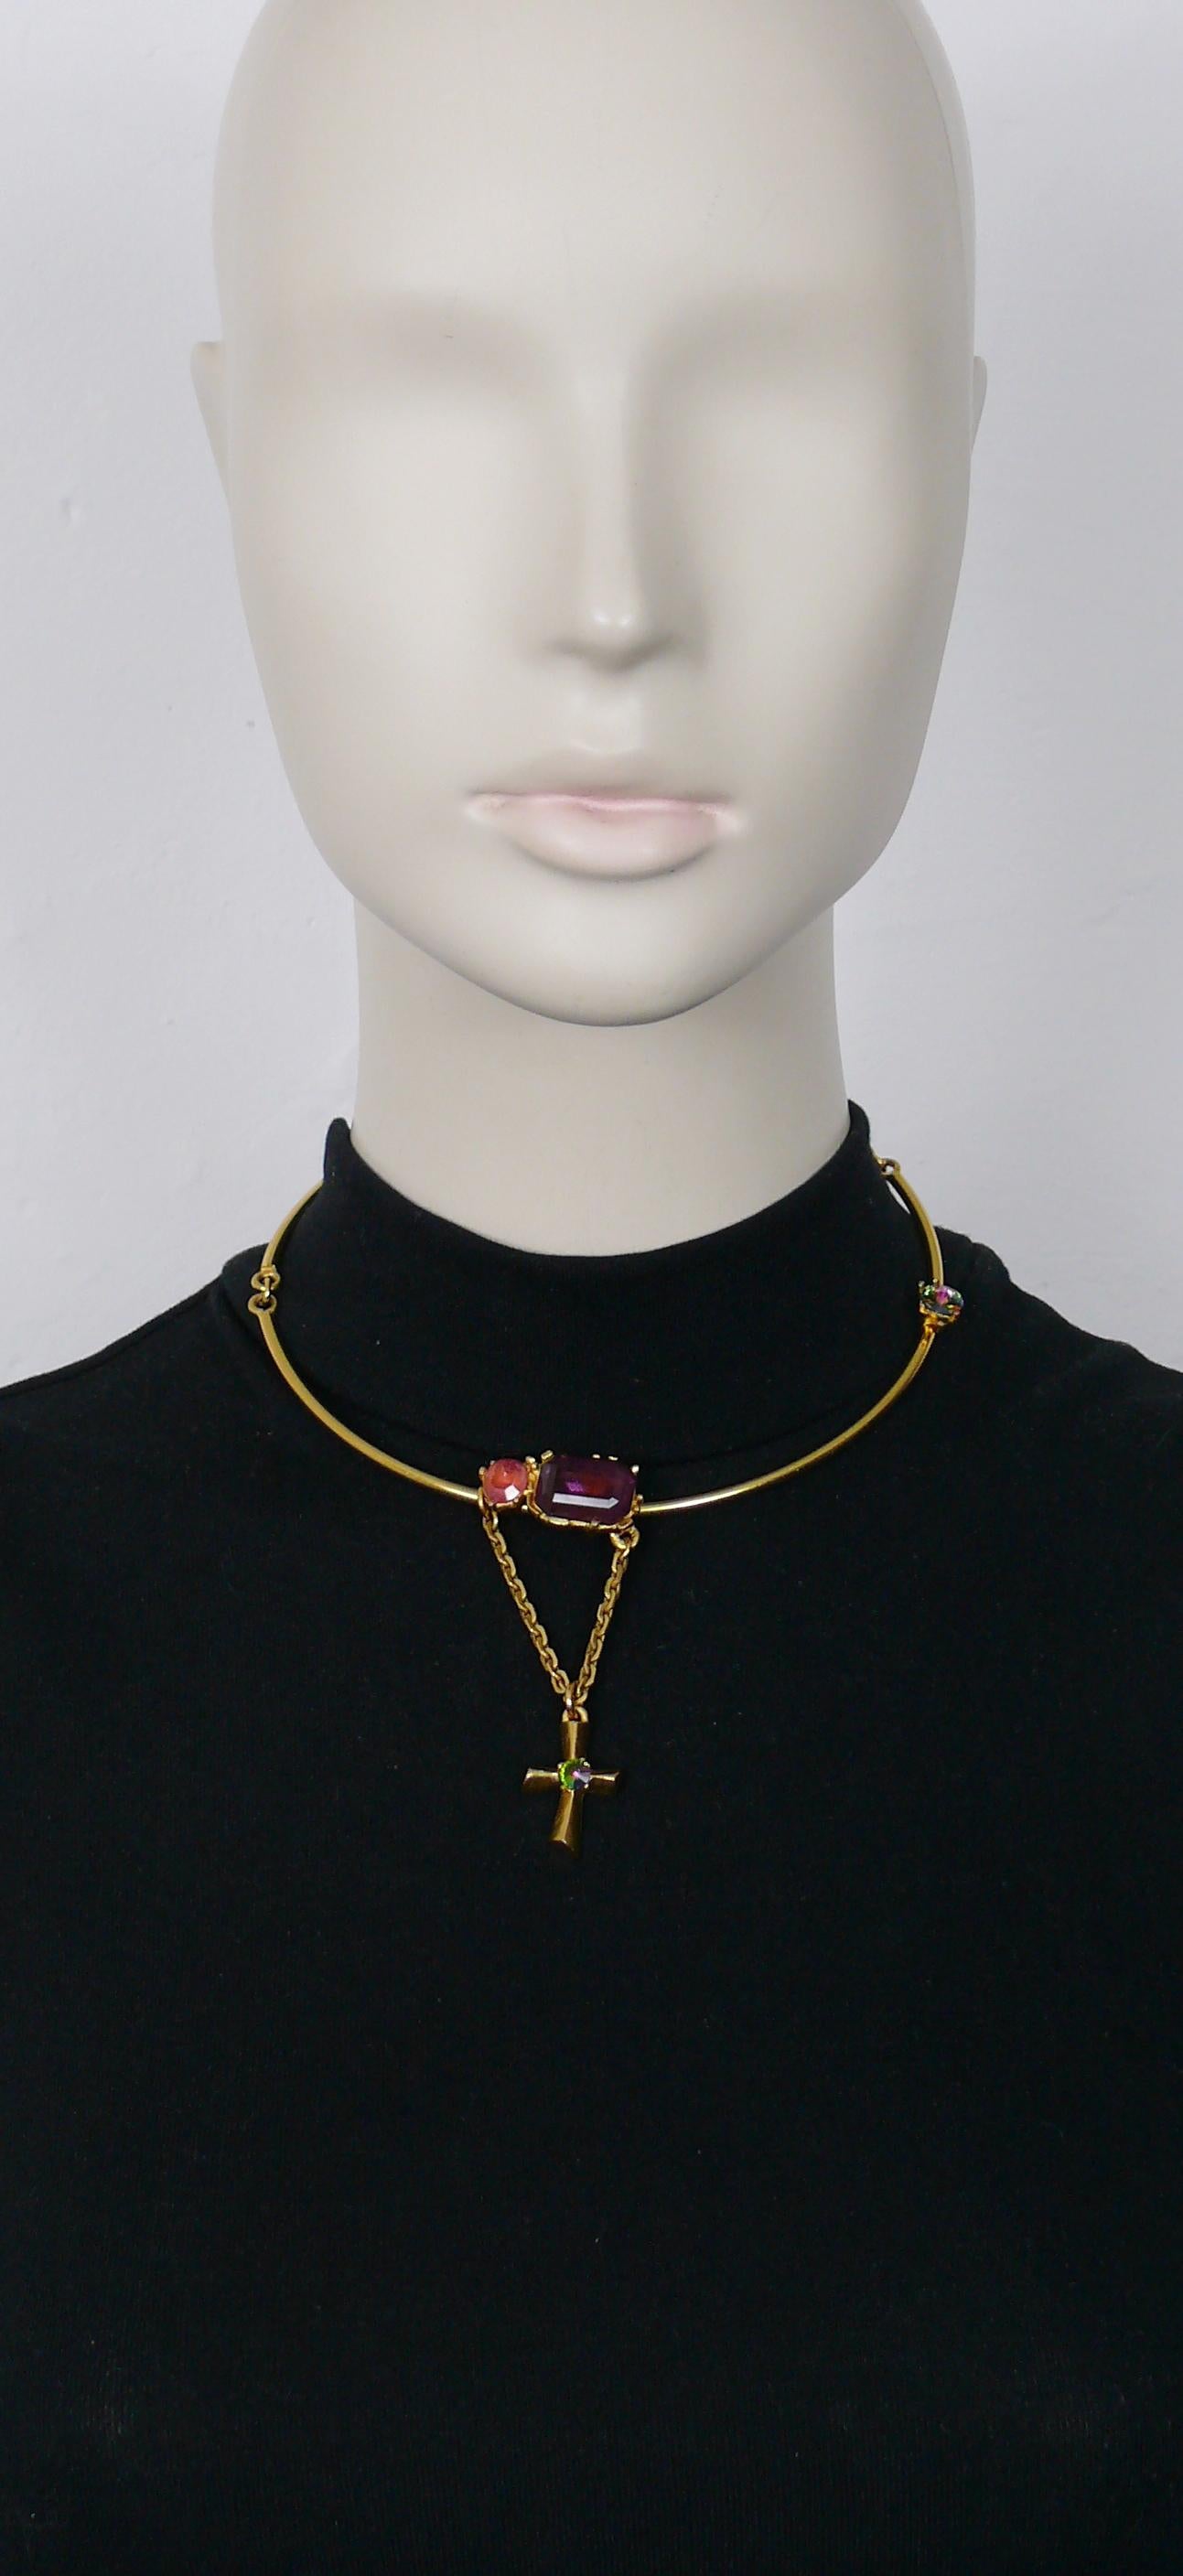 CHRISTIAN LACROIX vintage gold toned necklace embellished with pink, purple and iridescent crystals and featuring a little cross pendant.

CL signature charm at the end of the extension chain.
Embossed CHRISTIAN LACROIX CL Made in France on the